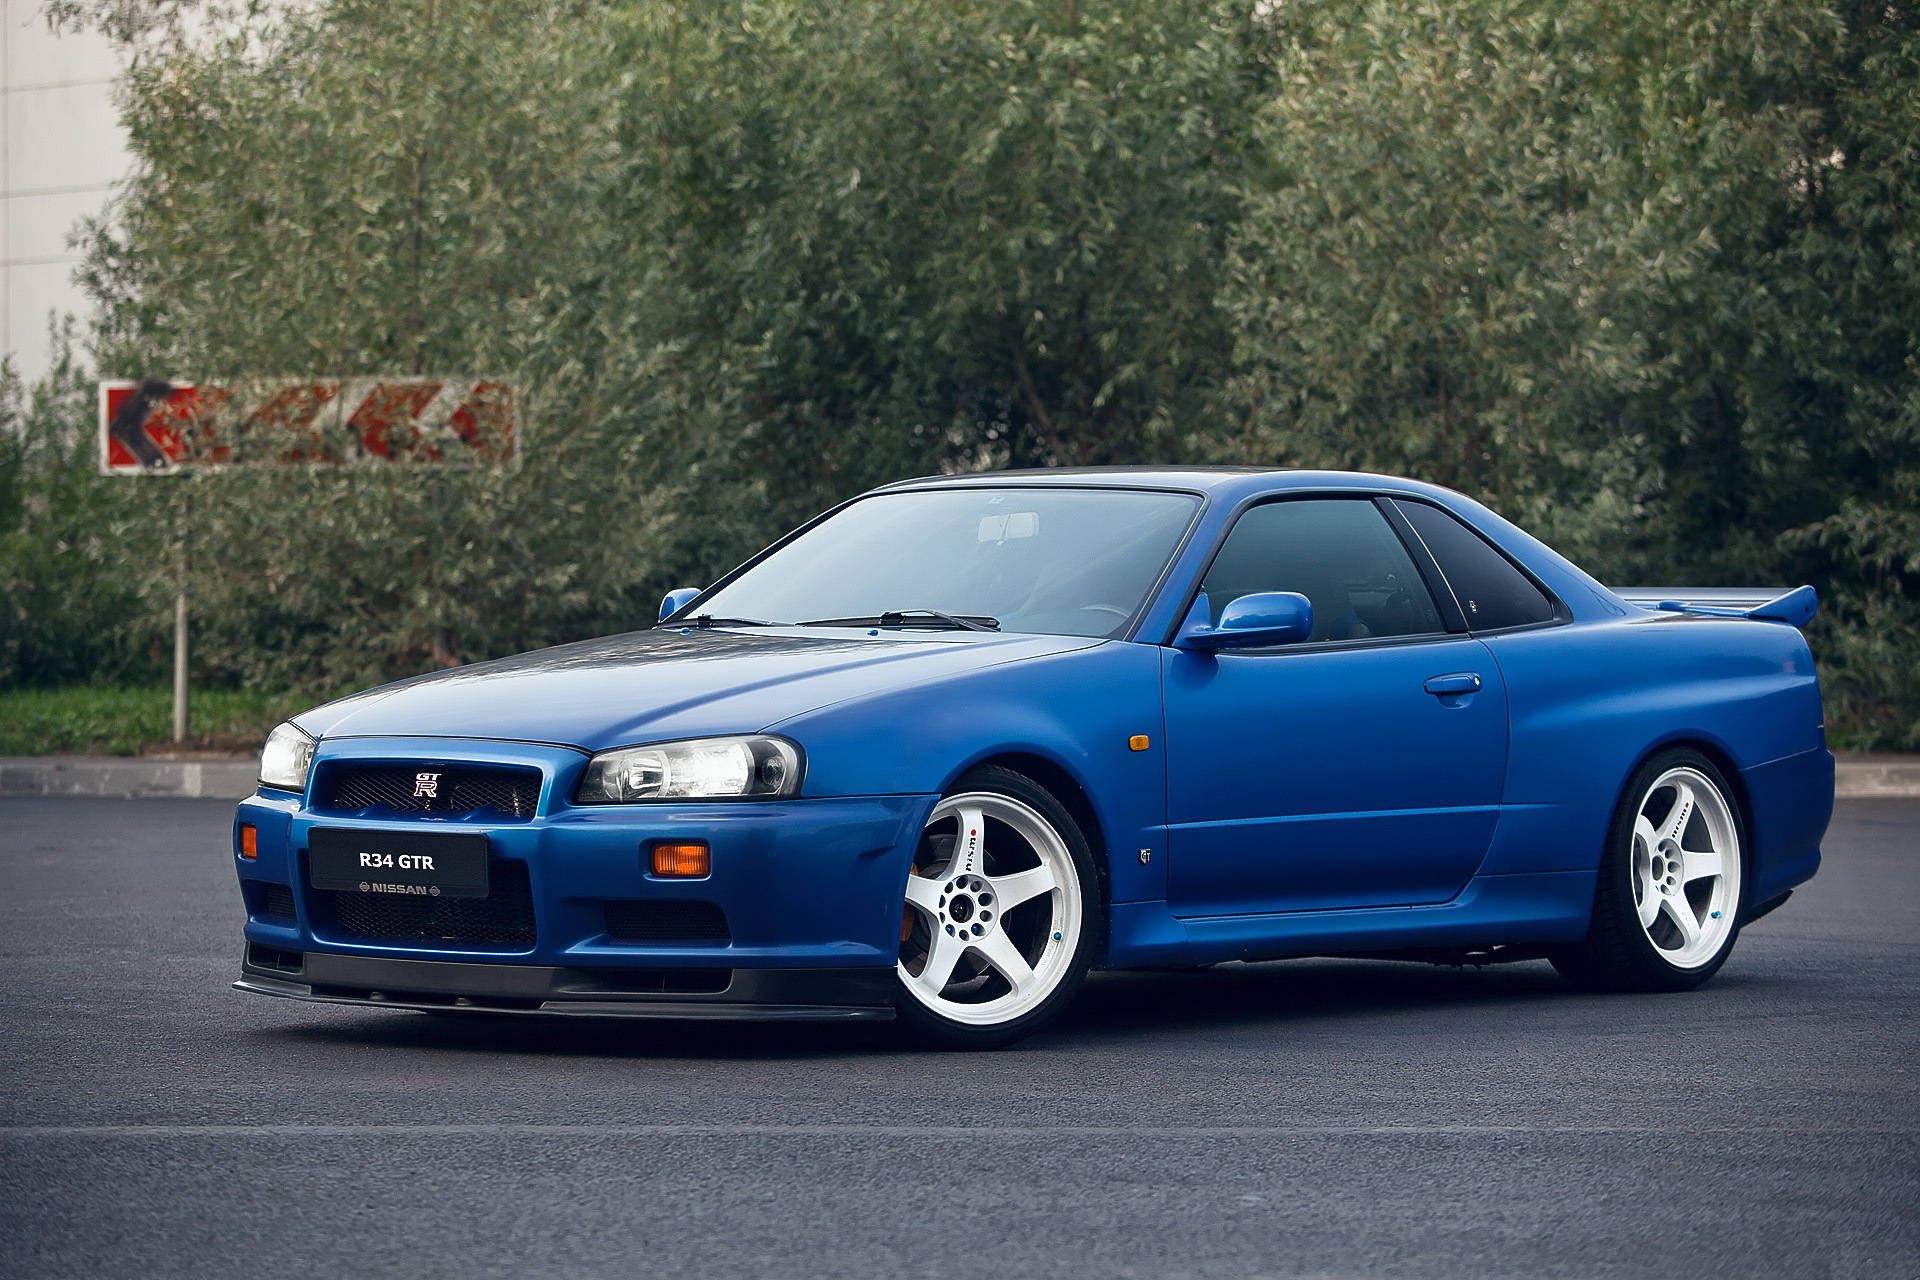 Caption: The Iconic Blue Nissan Skyline Gt-r R34 In All Its Glory Background